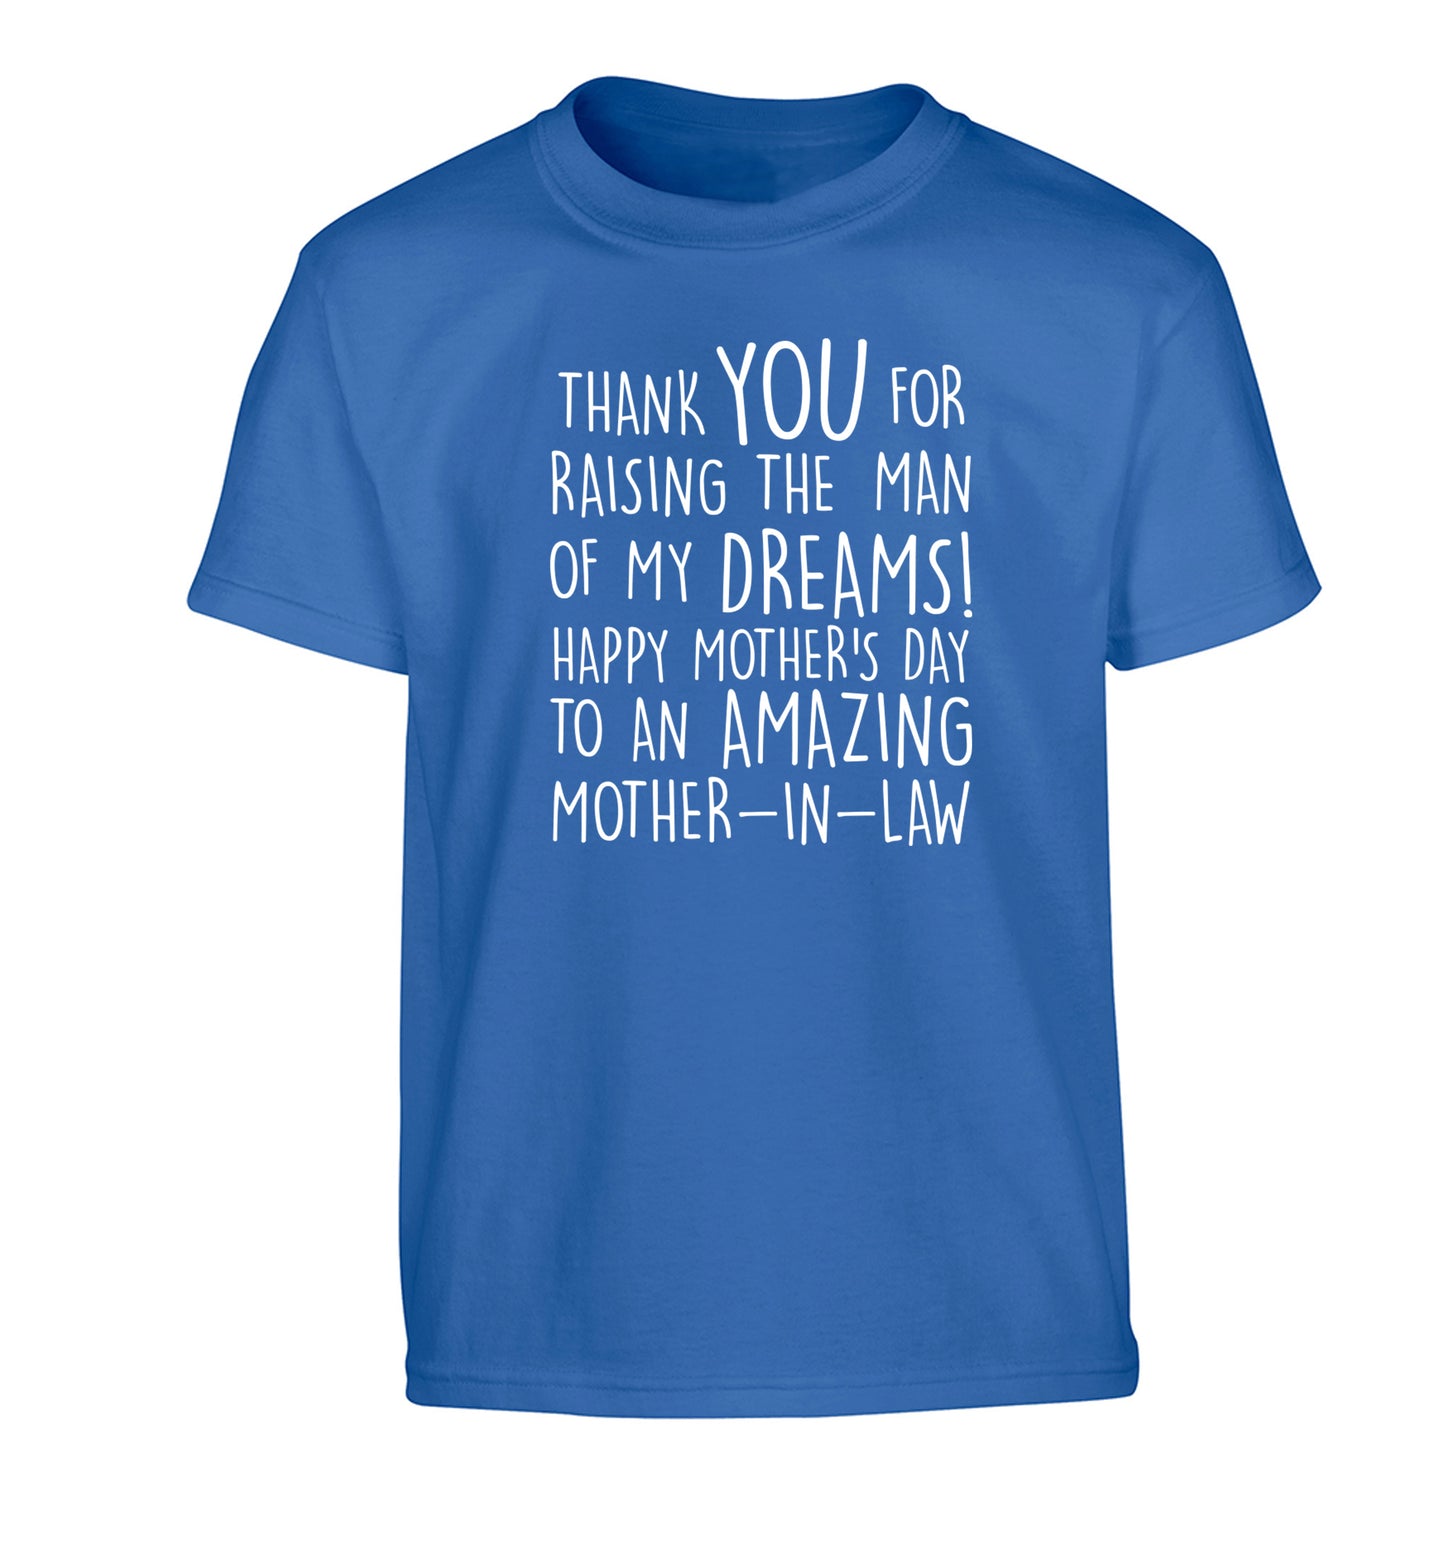 Thank you for raising the man of my dreams happy mother's day mother-in-law Children's blue Tshirt 12-13 Years